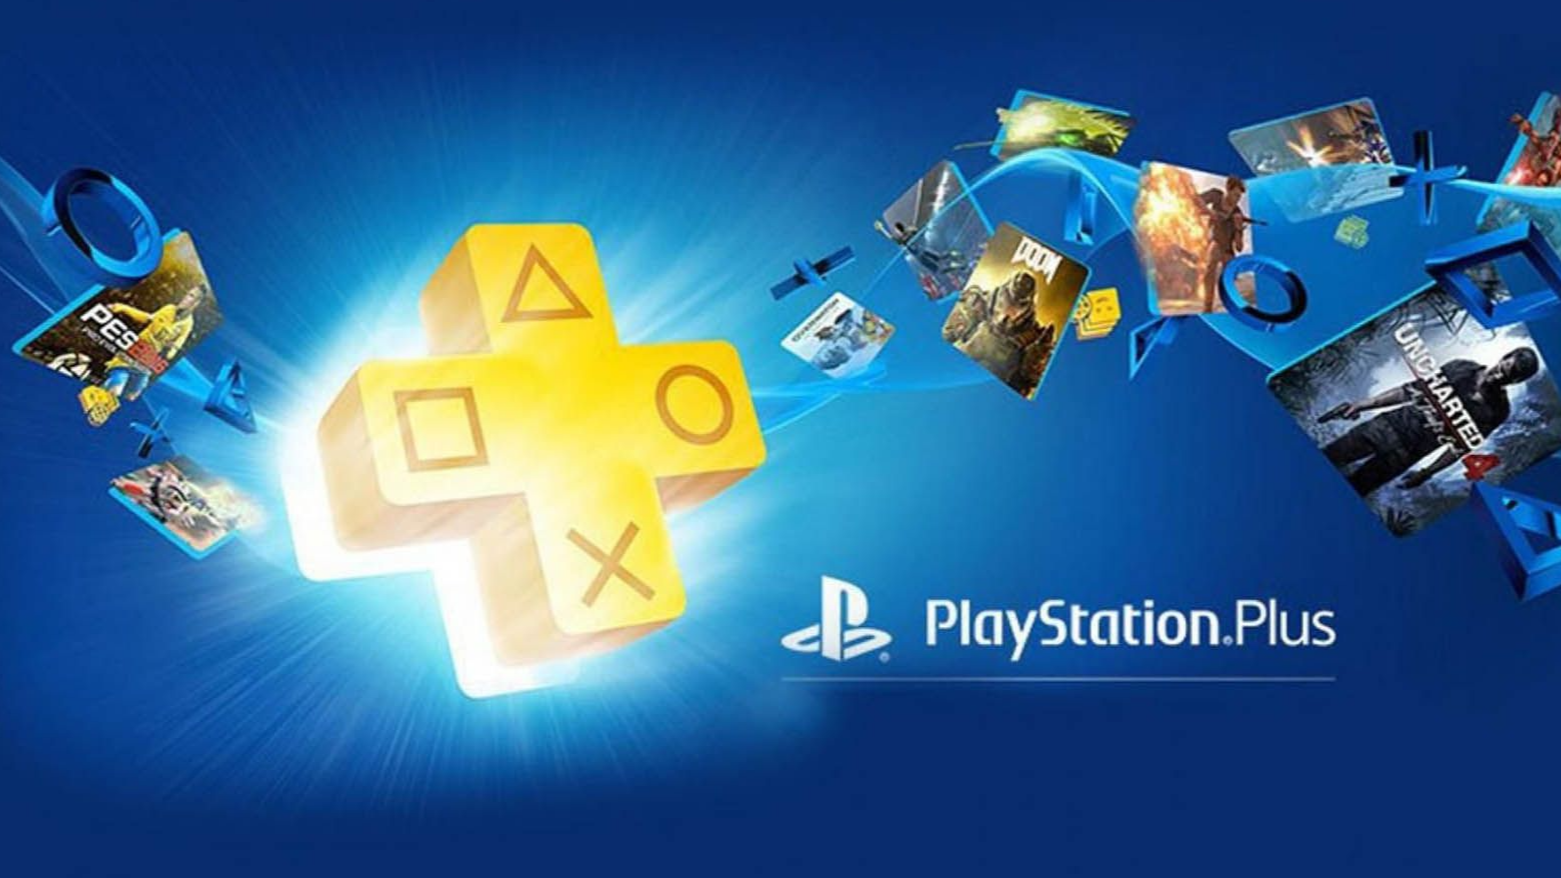 Playstation Plus Free Games For December 21 Confirmed